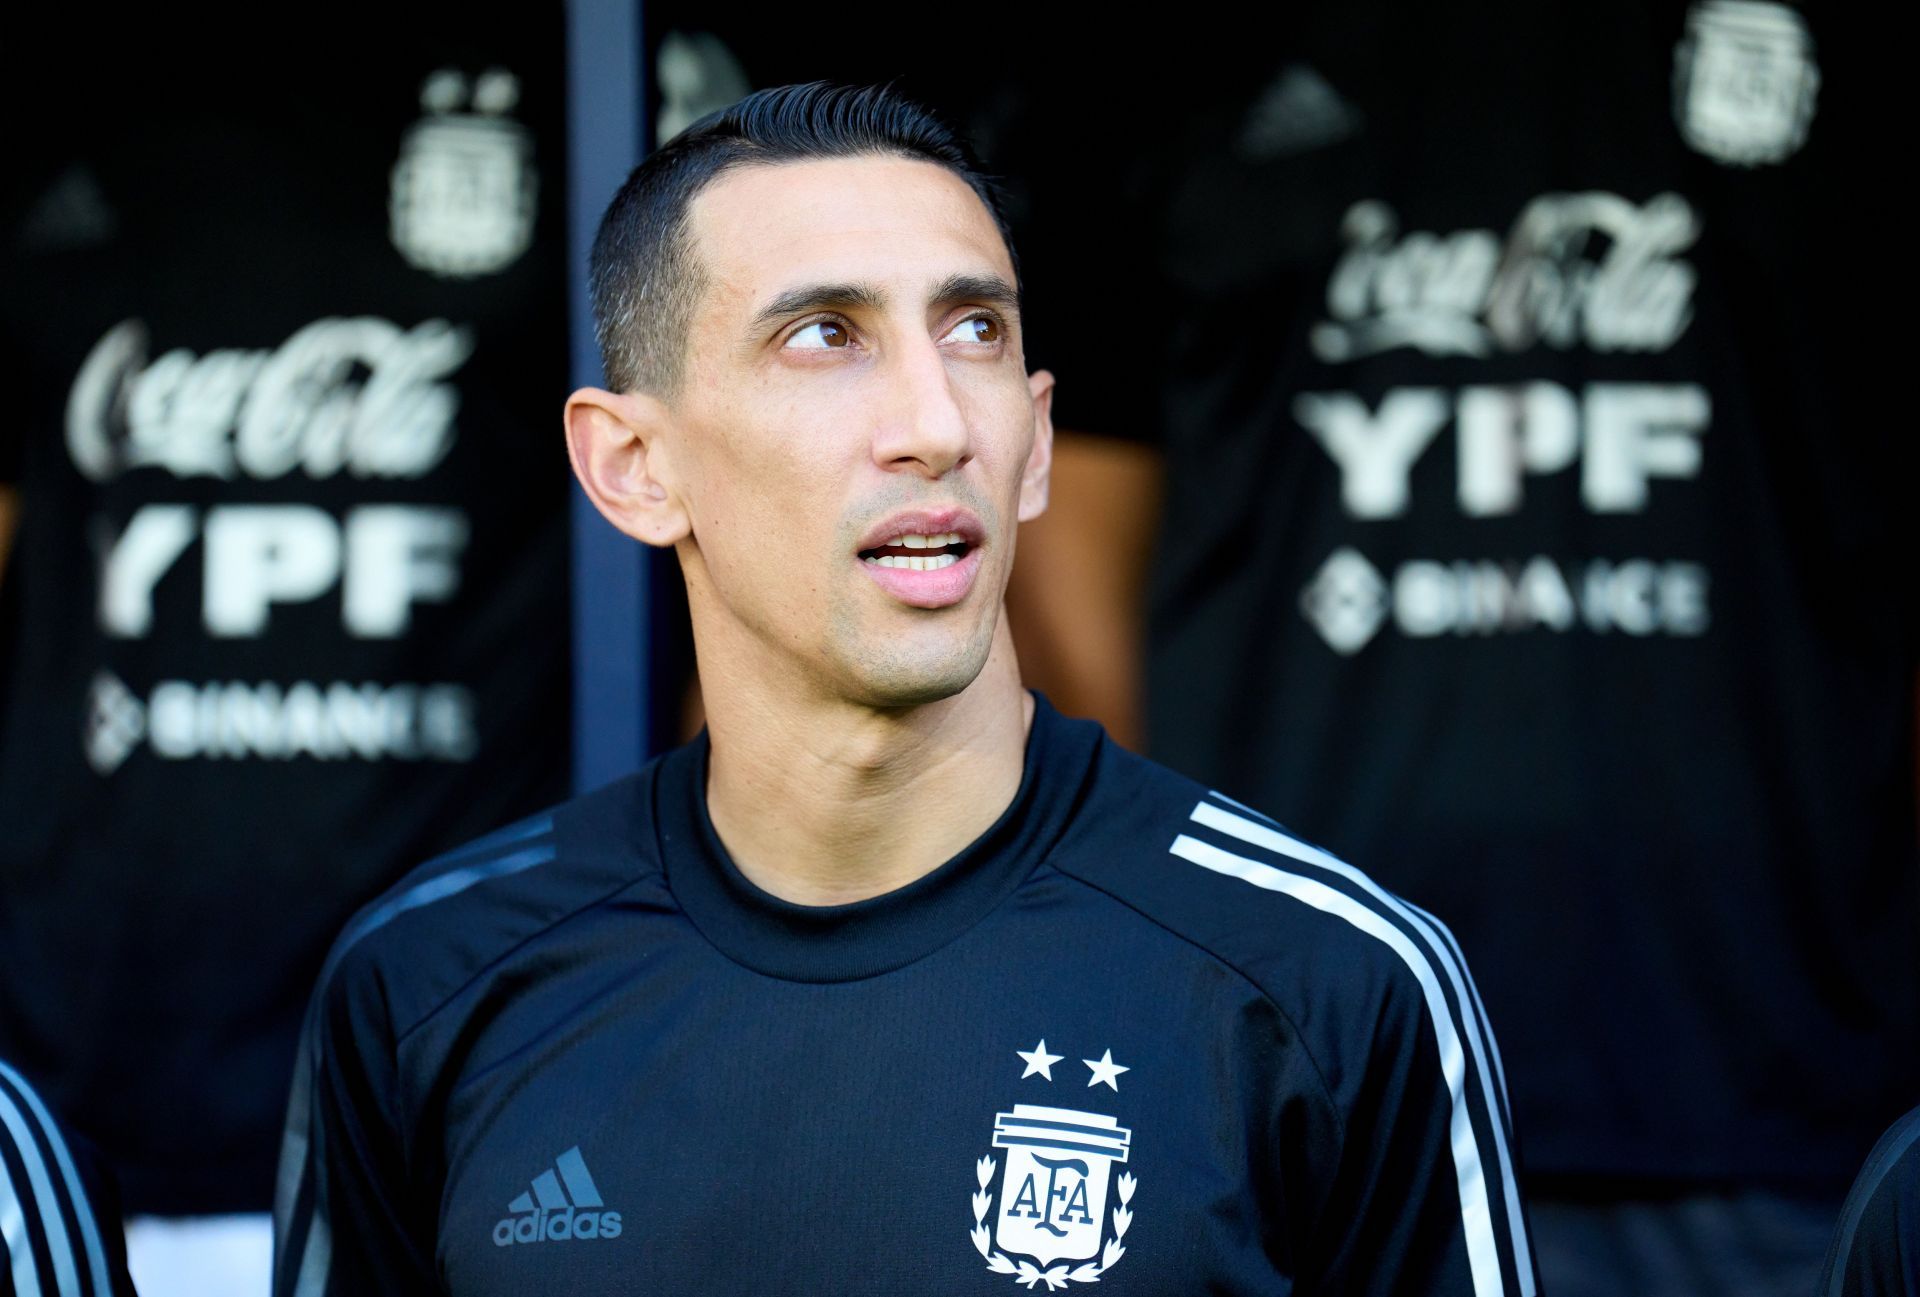 Angel Di Maria moved to Turin this summer.